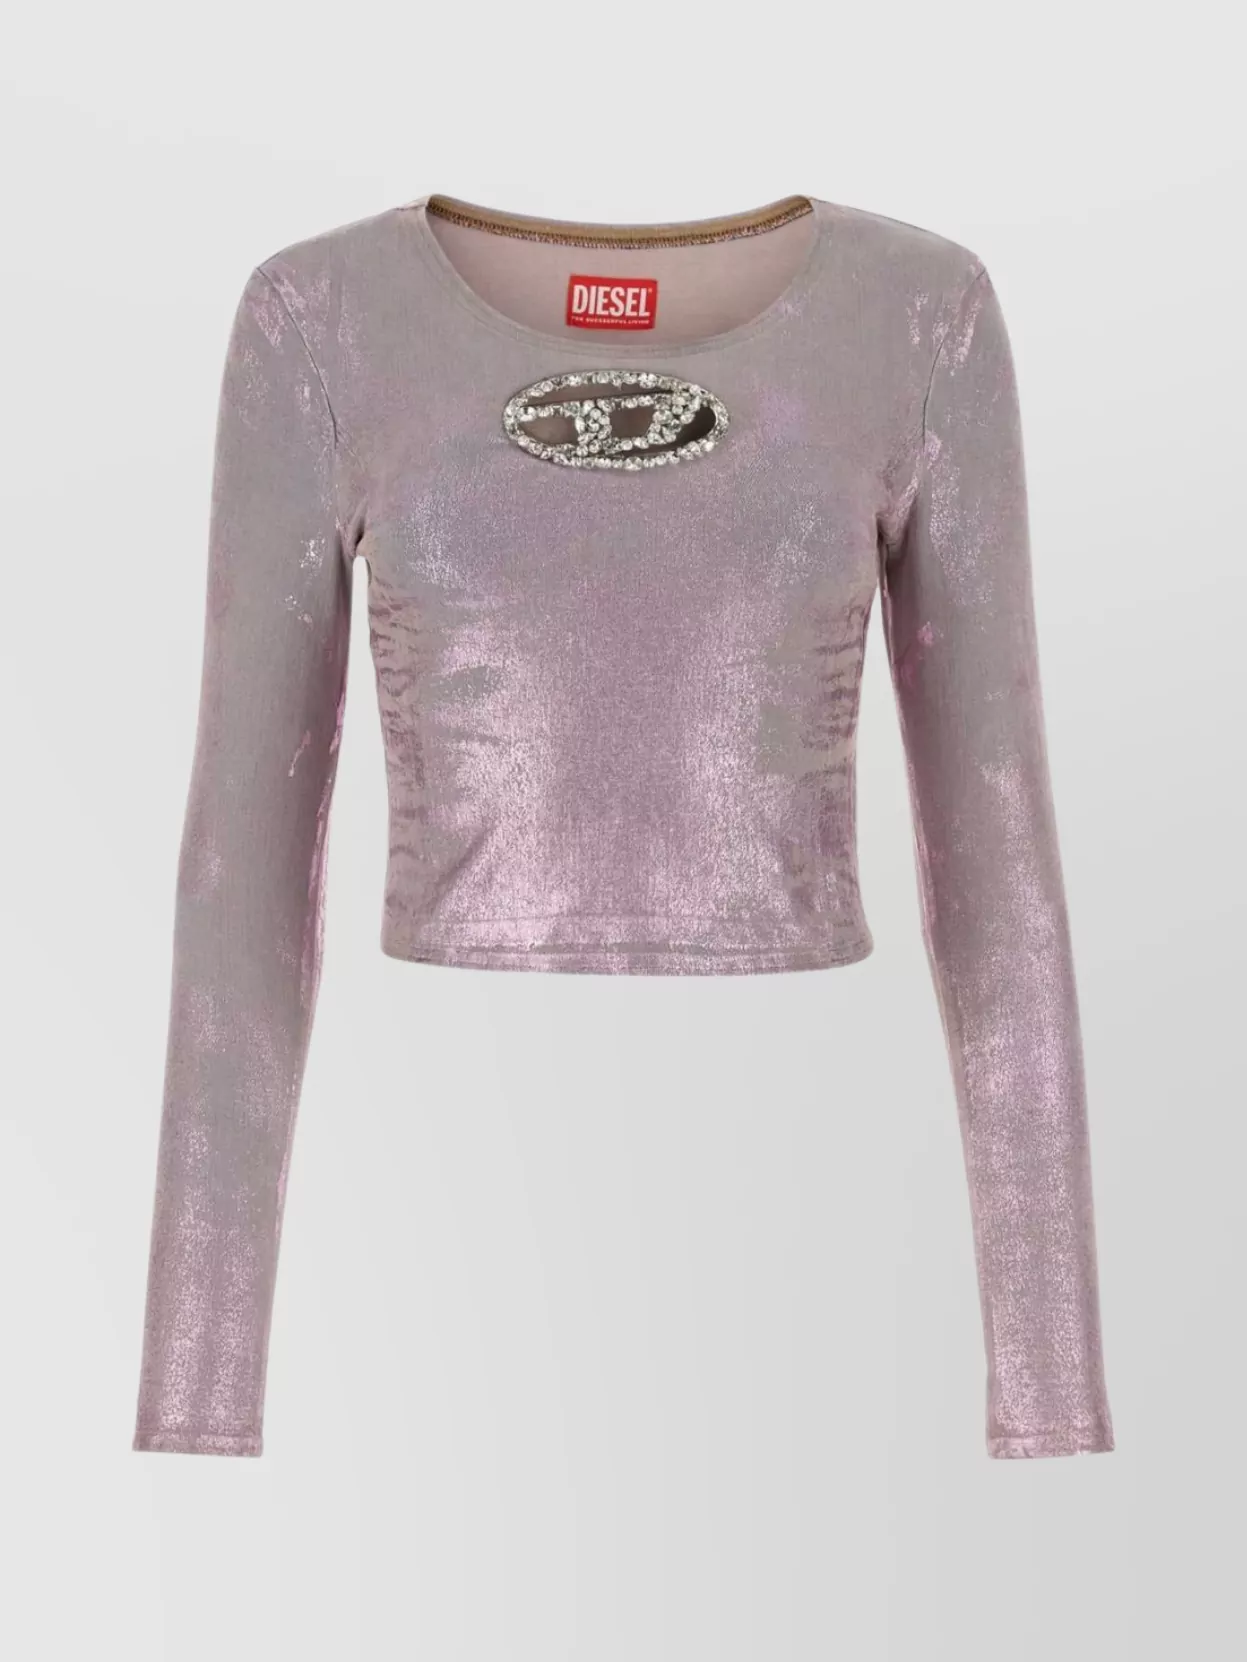 Diesel Stretch Denim Cropped Top With Metallic Finish In Pink